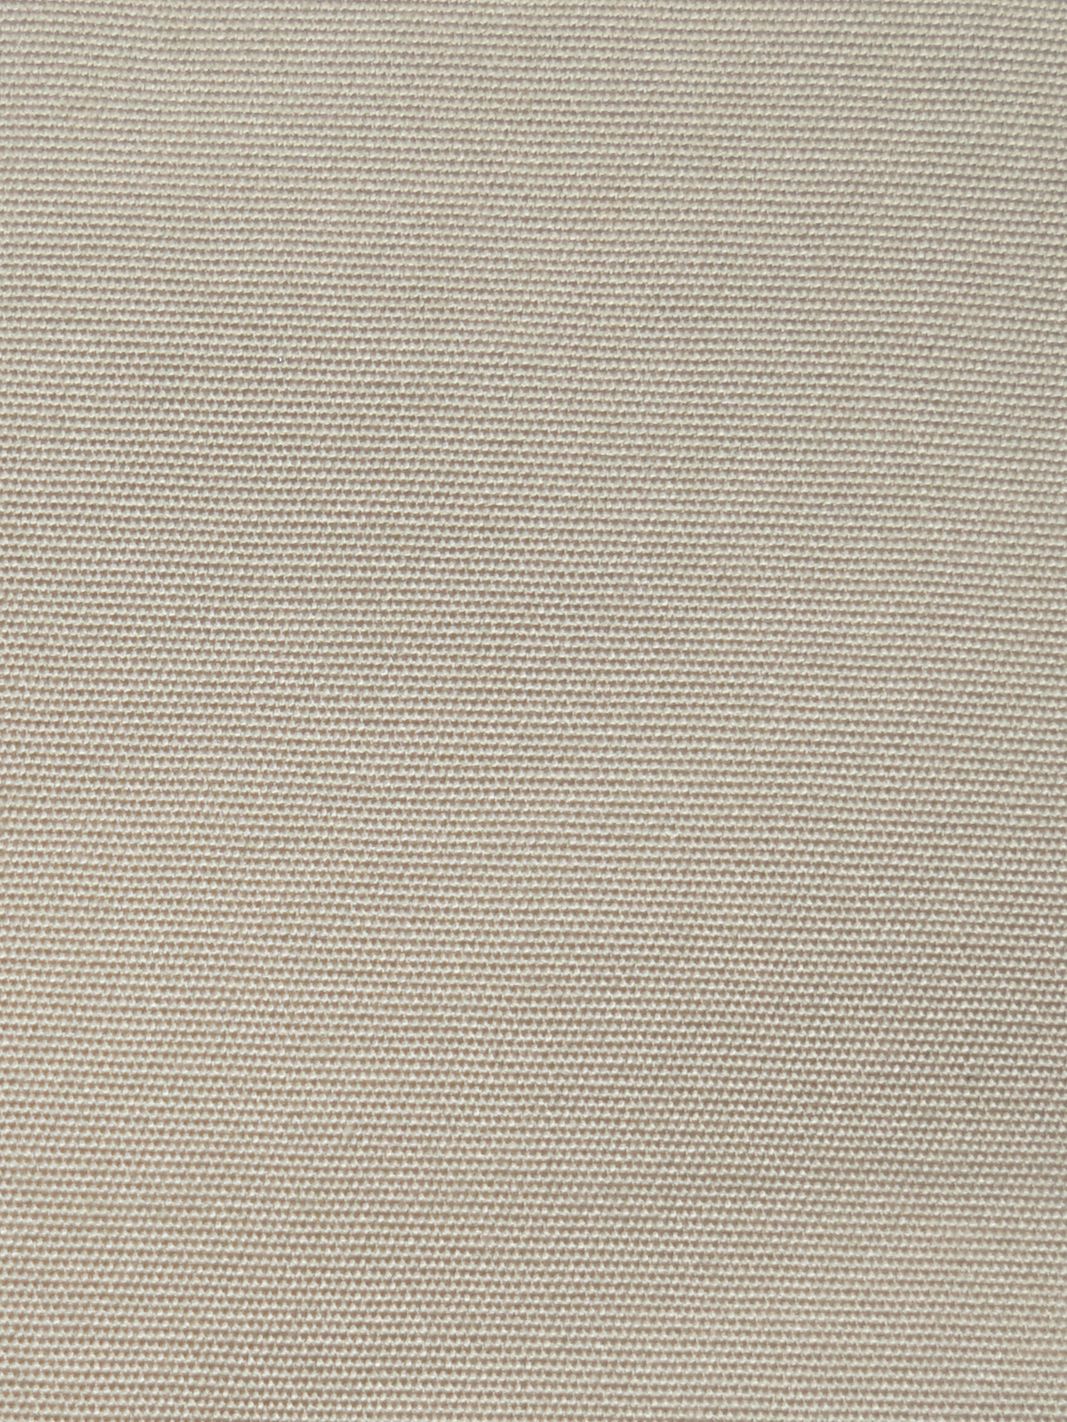 Outdoor Canvas fabric in antique beige color - pattern number GV 00015422 - by Scalamandre in the Old World Weavers collection